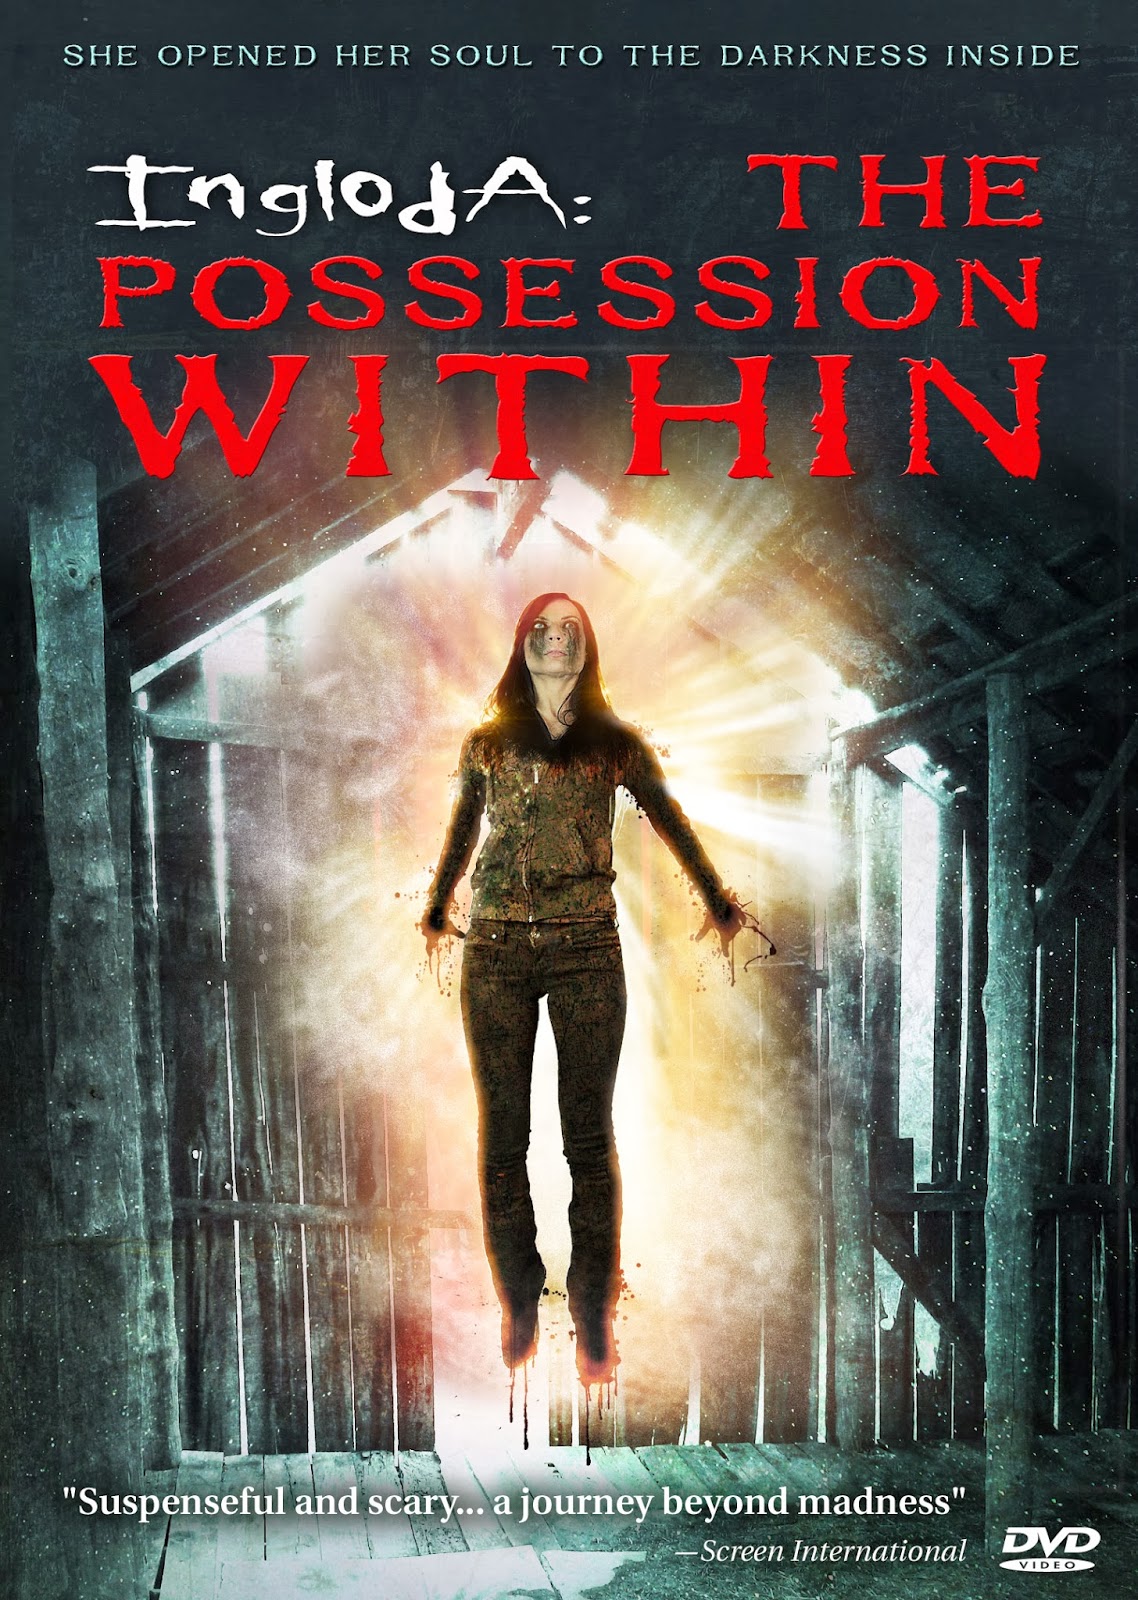 Ingloda: The Possession Within DVD Cover (Unapproved, V5)